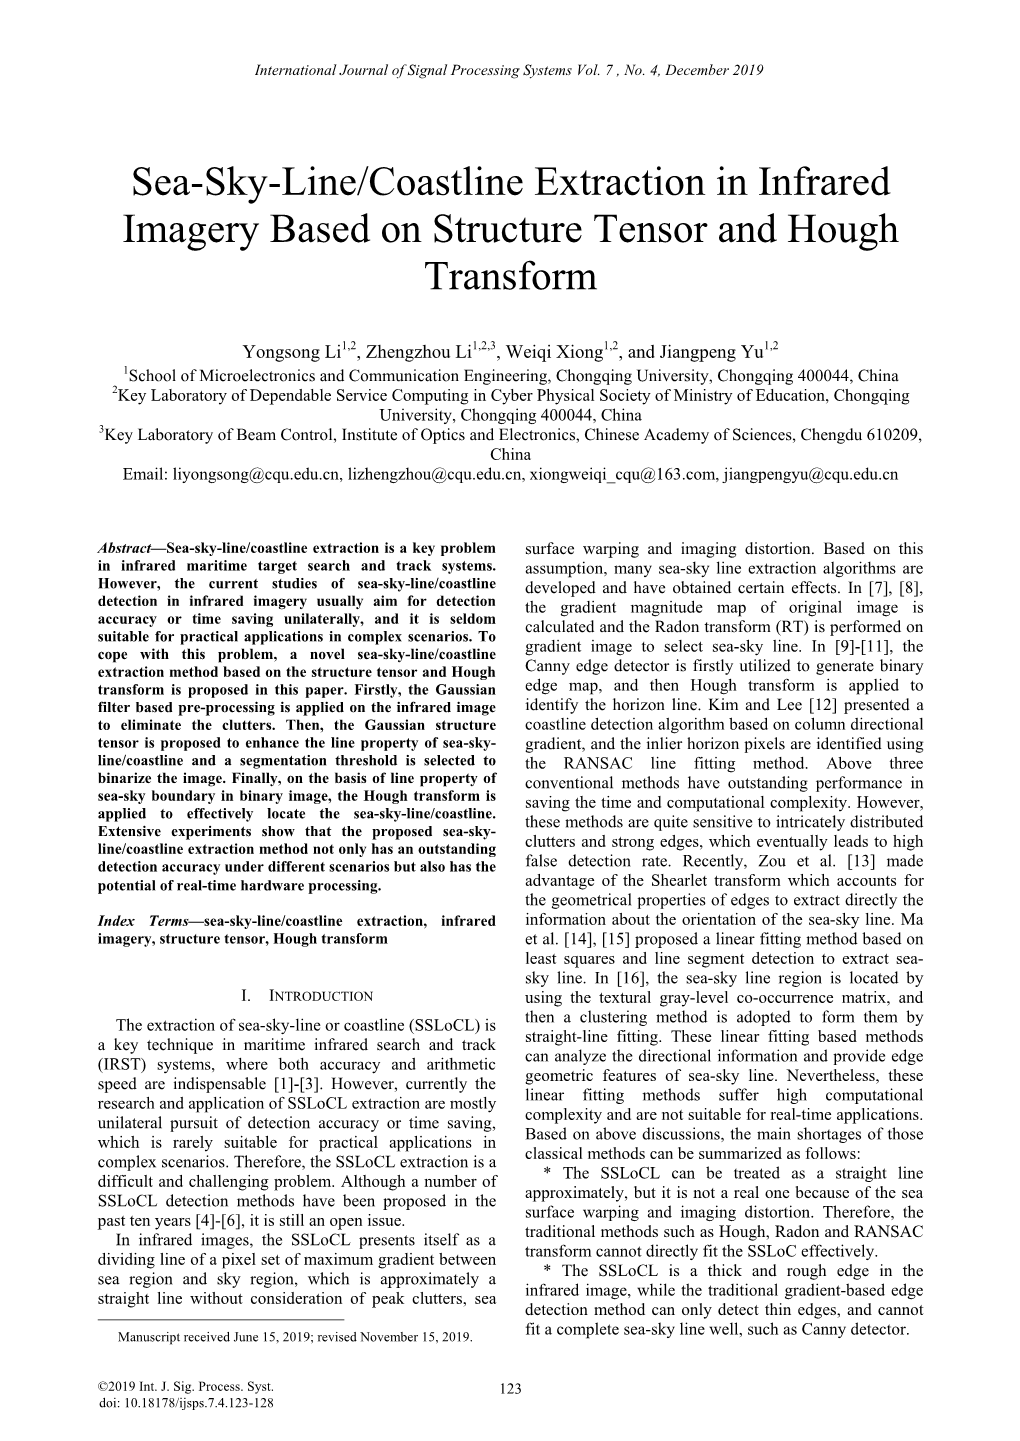 Sea-Sky-Line/Coastline Extraction in Infrared Imagery Based on Structure Tensor and Hough Transform